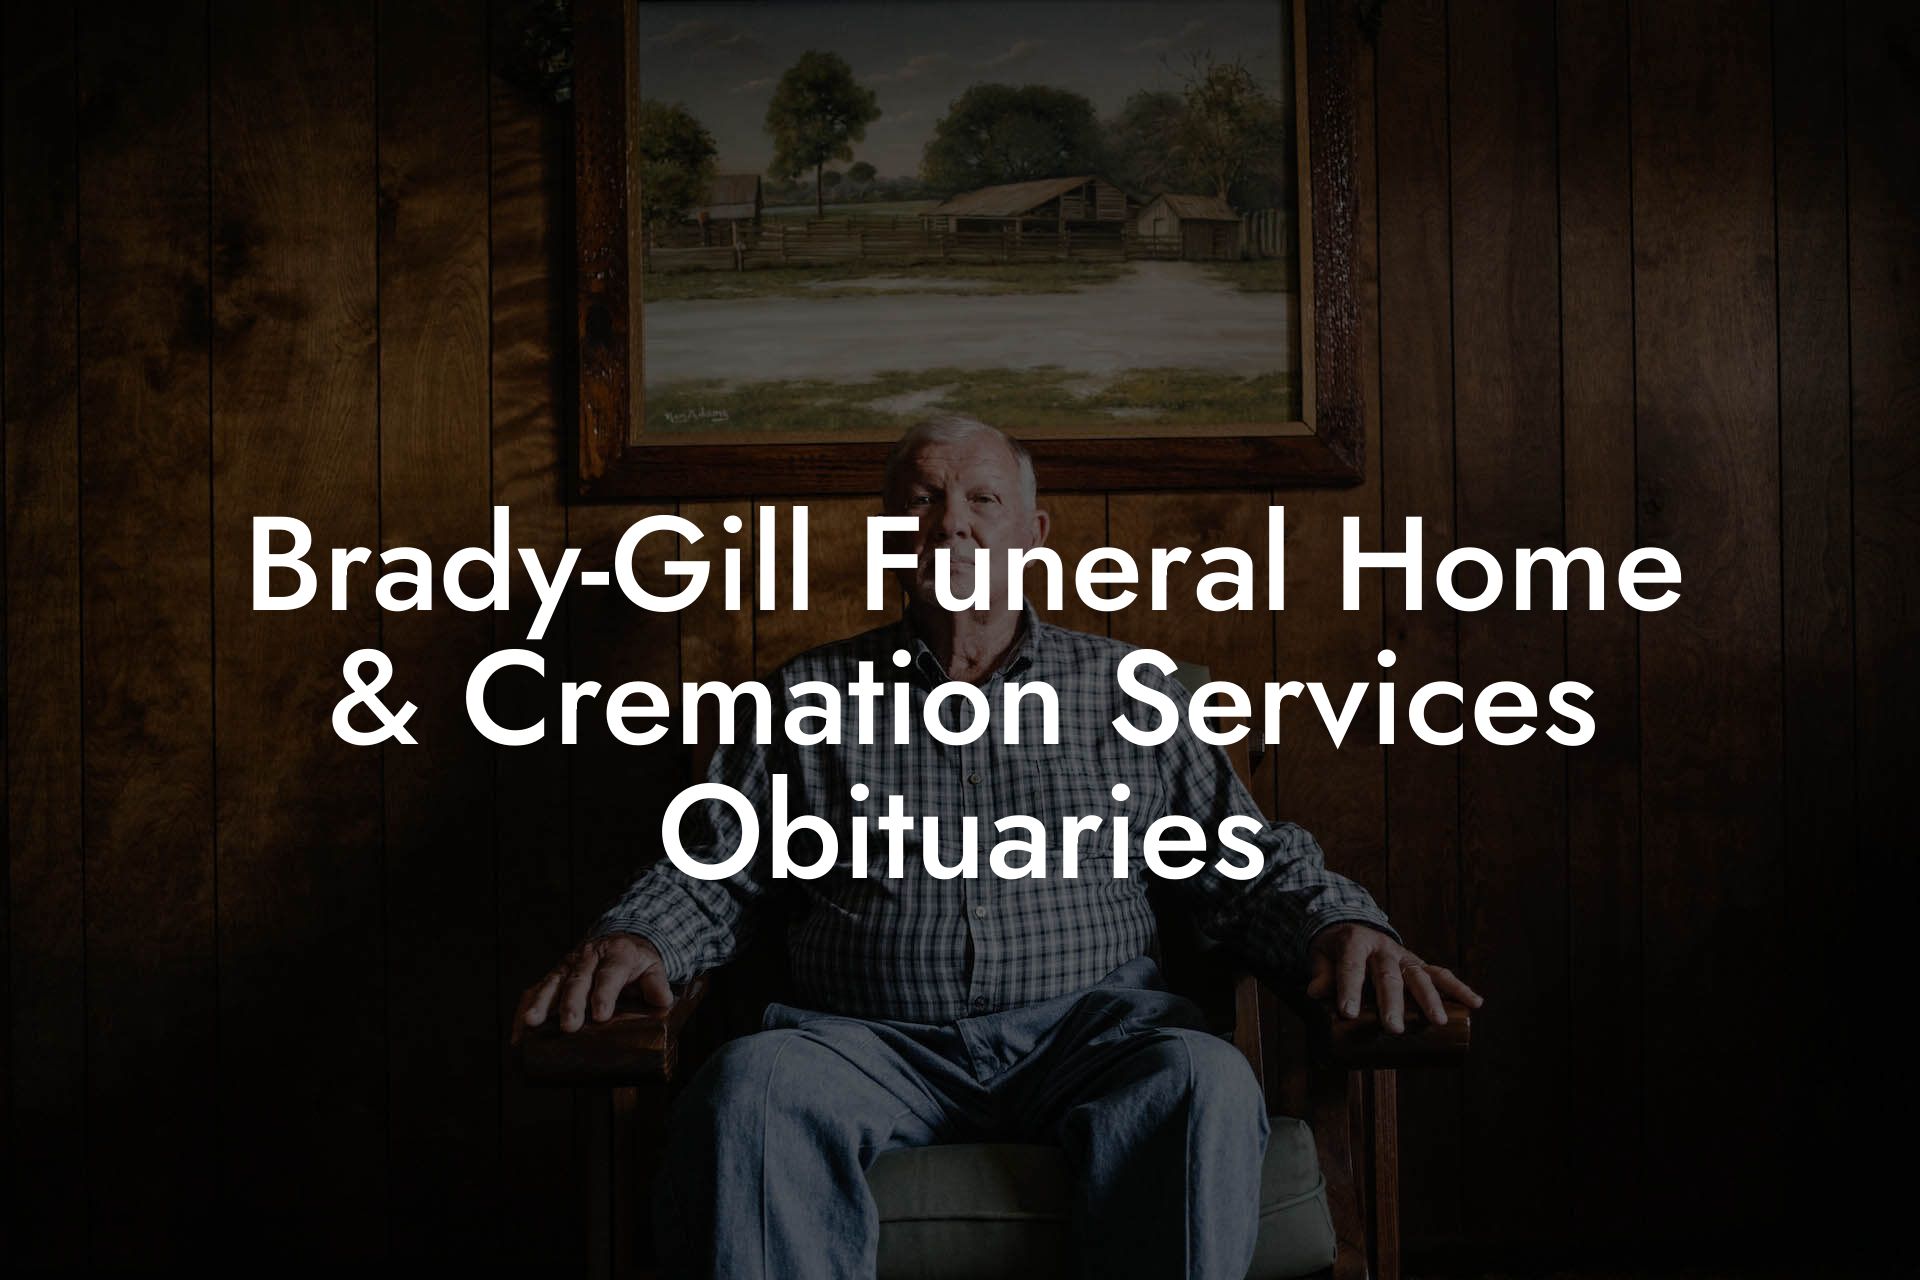 Brady-Gill Funeral Home & Cremation Services Obituaries